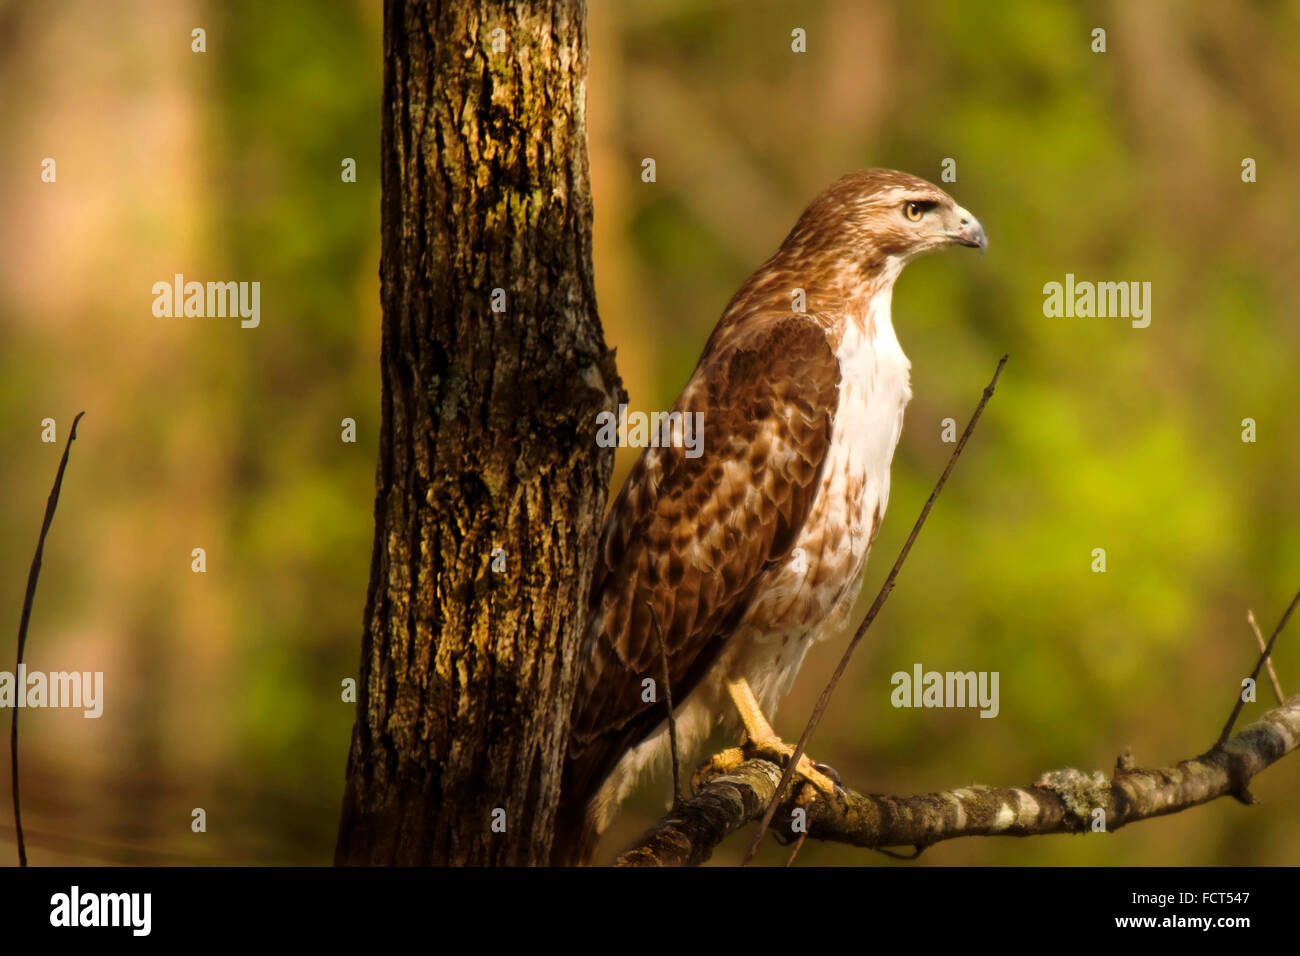 Red-tailed hawk (buteo jamaicensis) close-up, on a limb of a tree. Stock Photo